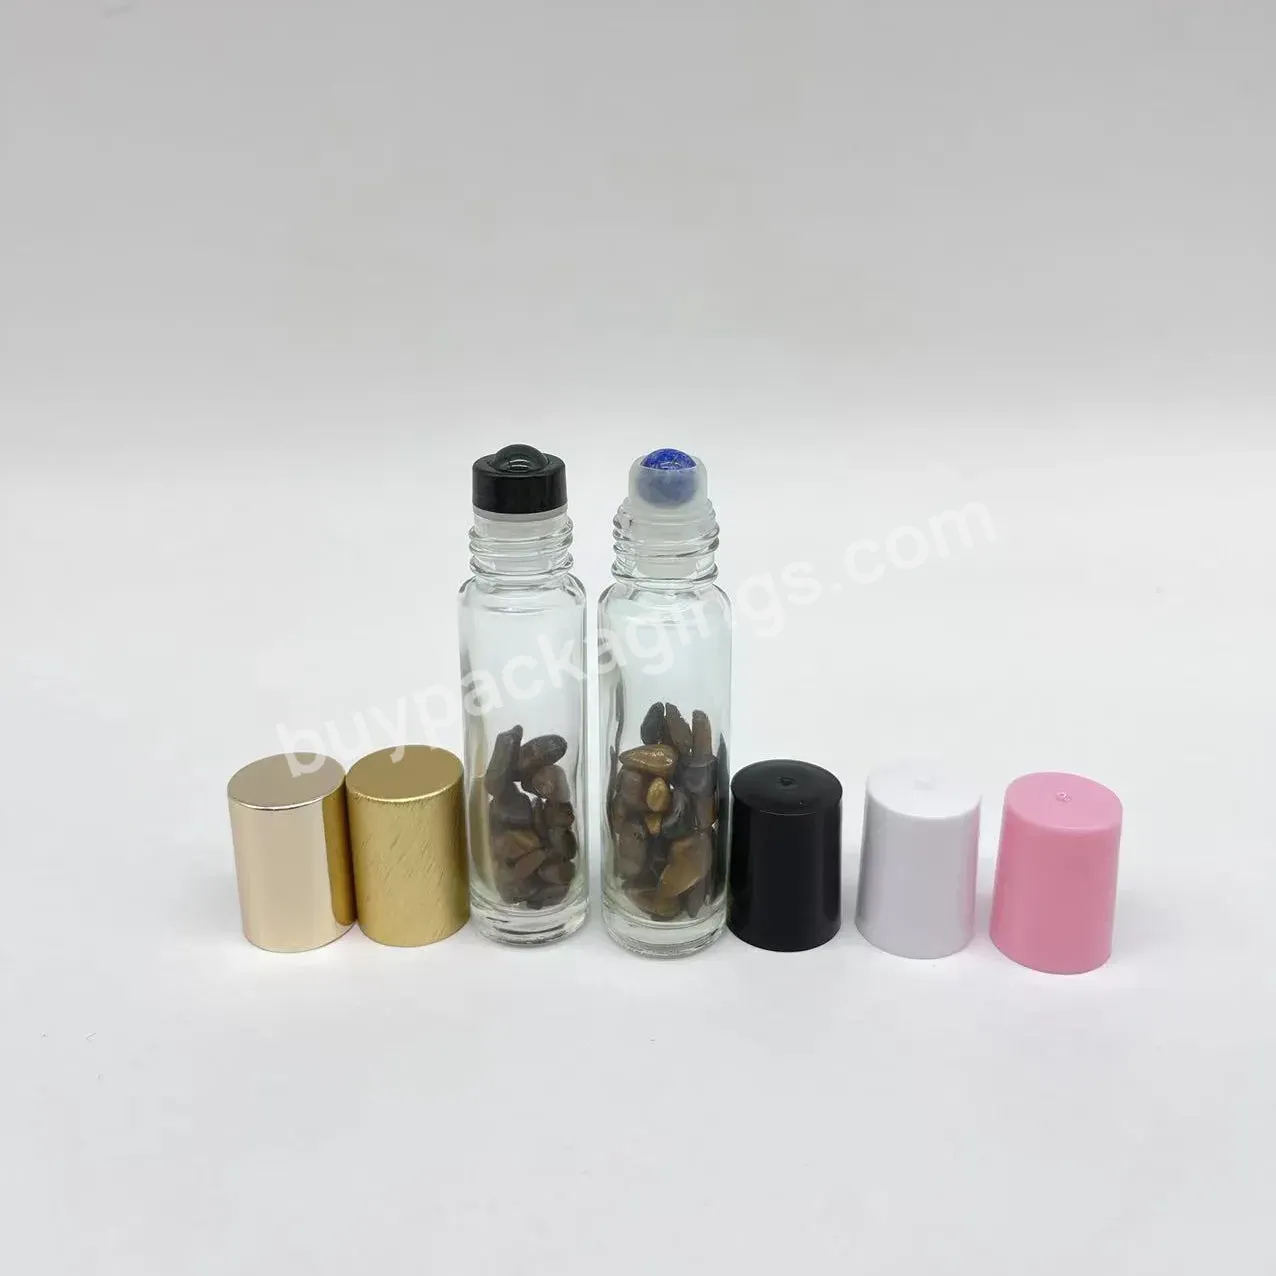 Empty Clear Glass Gemstone Roller Oil Perfume Bottle With Crystal Chips Inside 10ml - Buy Gemstone Face Massage Roller Oil Perfume Bottle,10ml Clear Glass Roller Bottle With Gemstone Chips,Clear Blue Crystal Perfume Bottle.